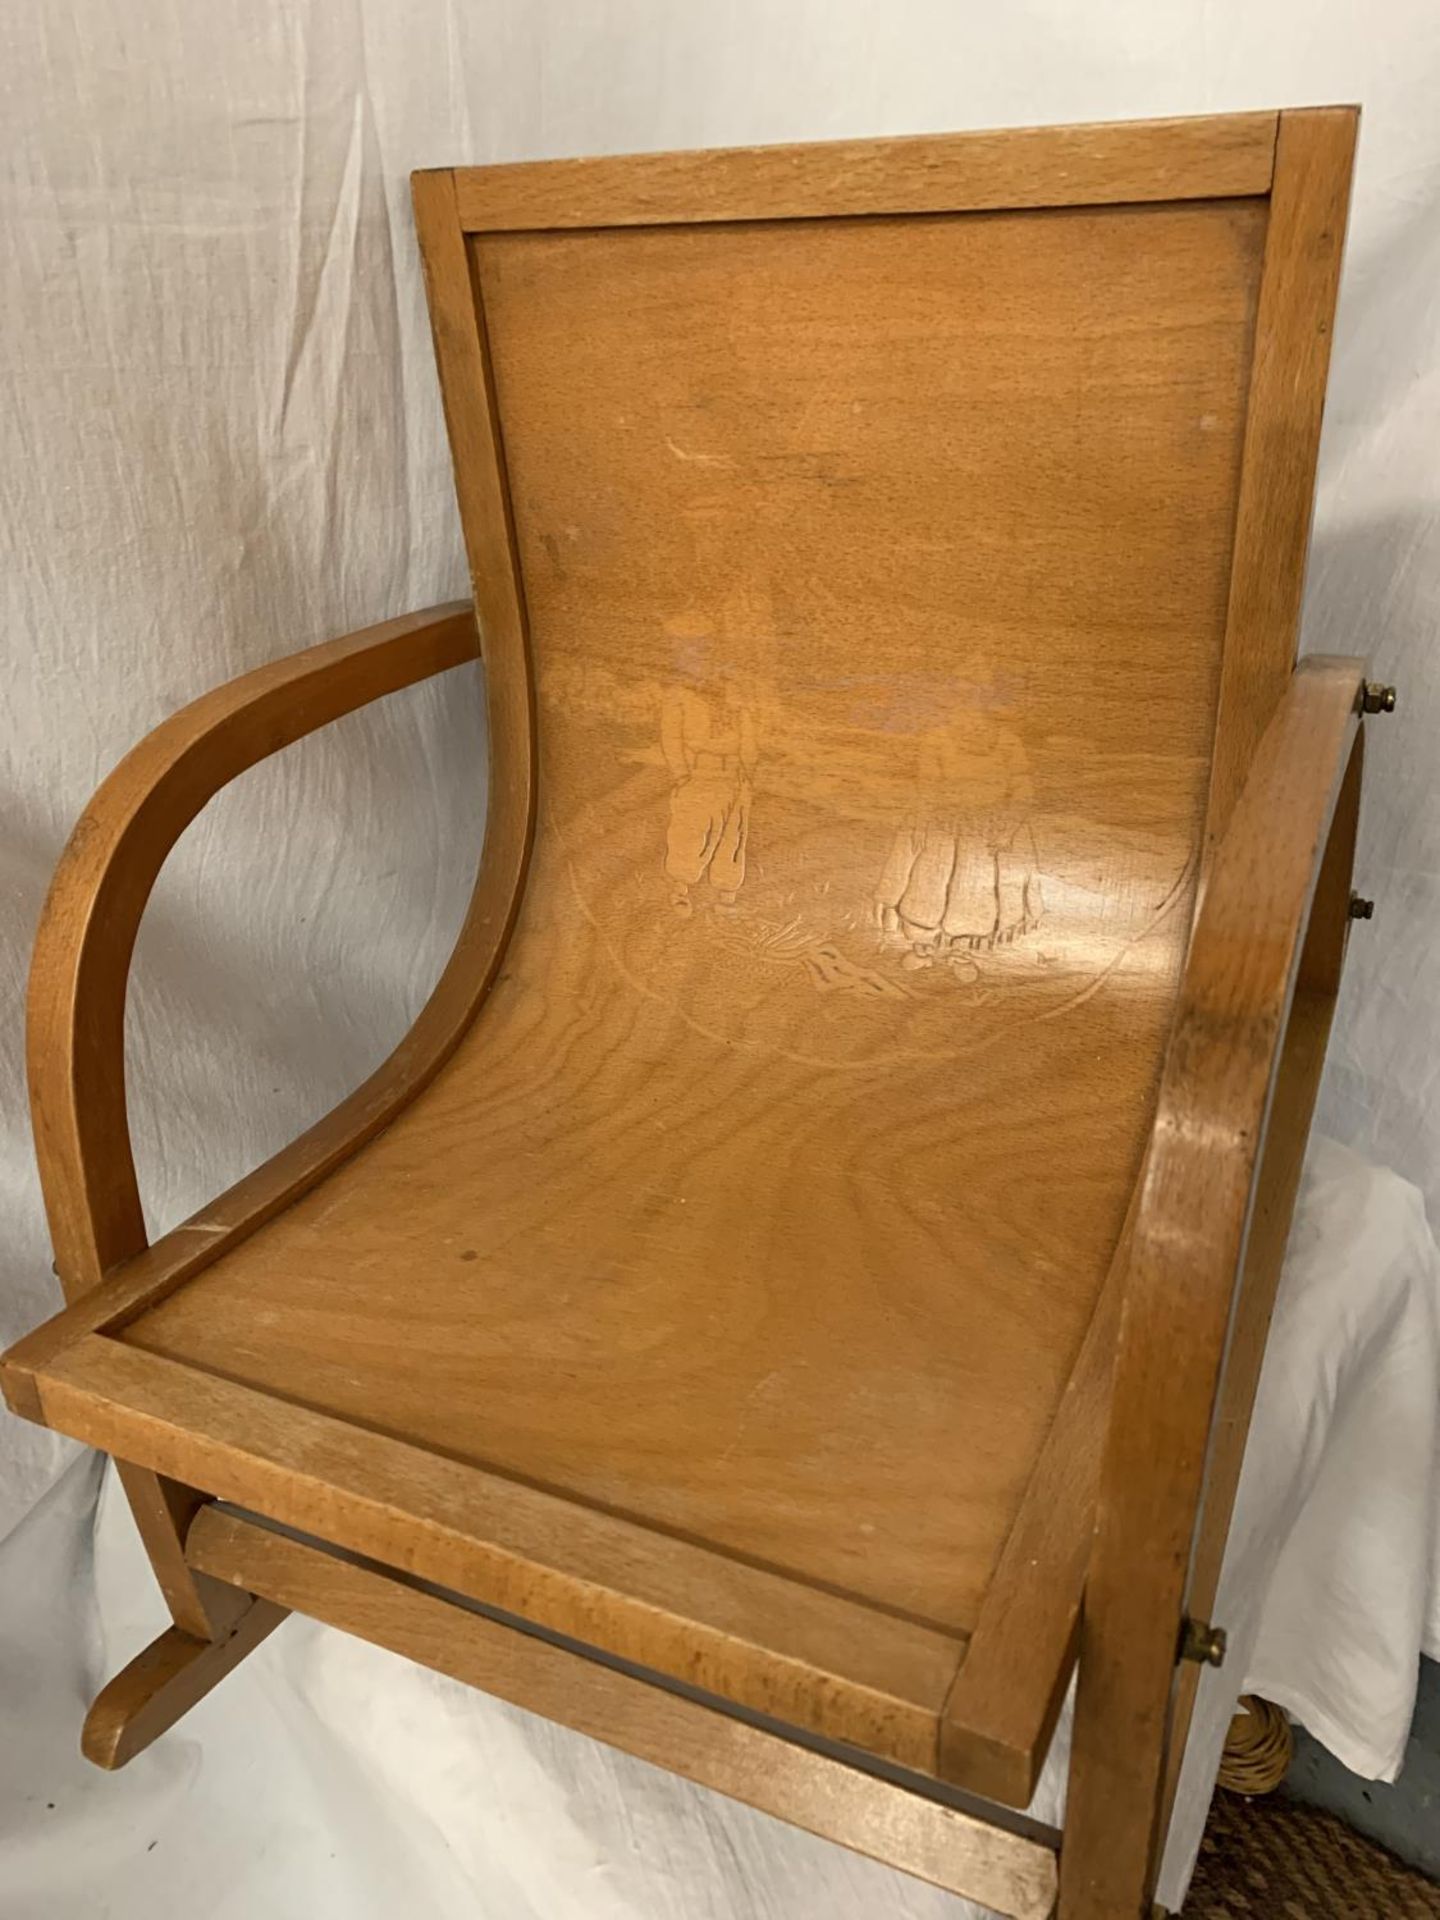 A CHILD'S WOODEN SCANDINAVIAN STYLE ROCKING CHAIR - Image 2 of 4